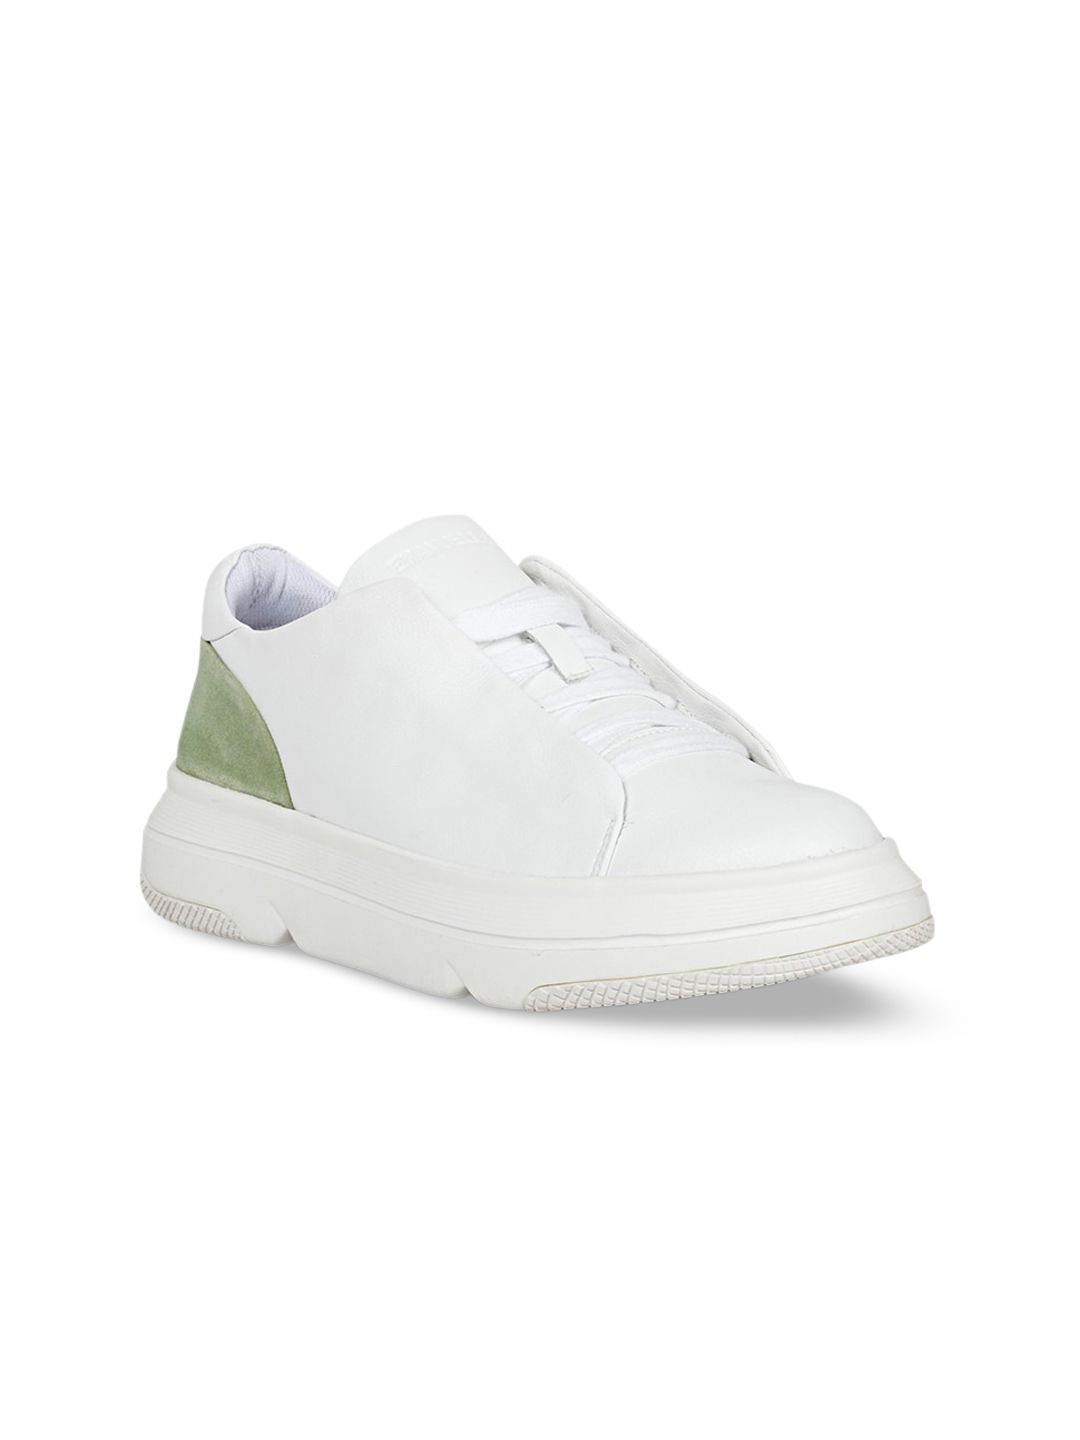 Saint G Women Leather Basics Sneakers Price in India